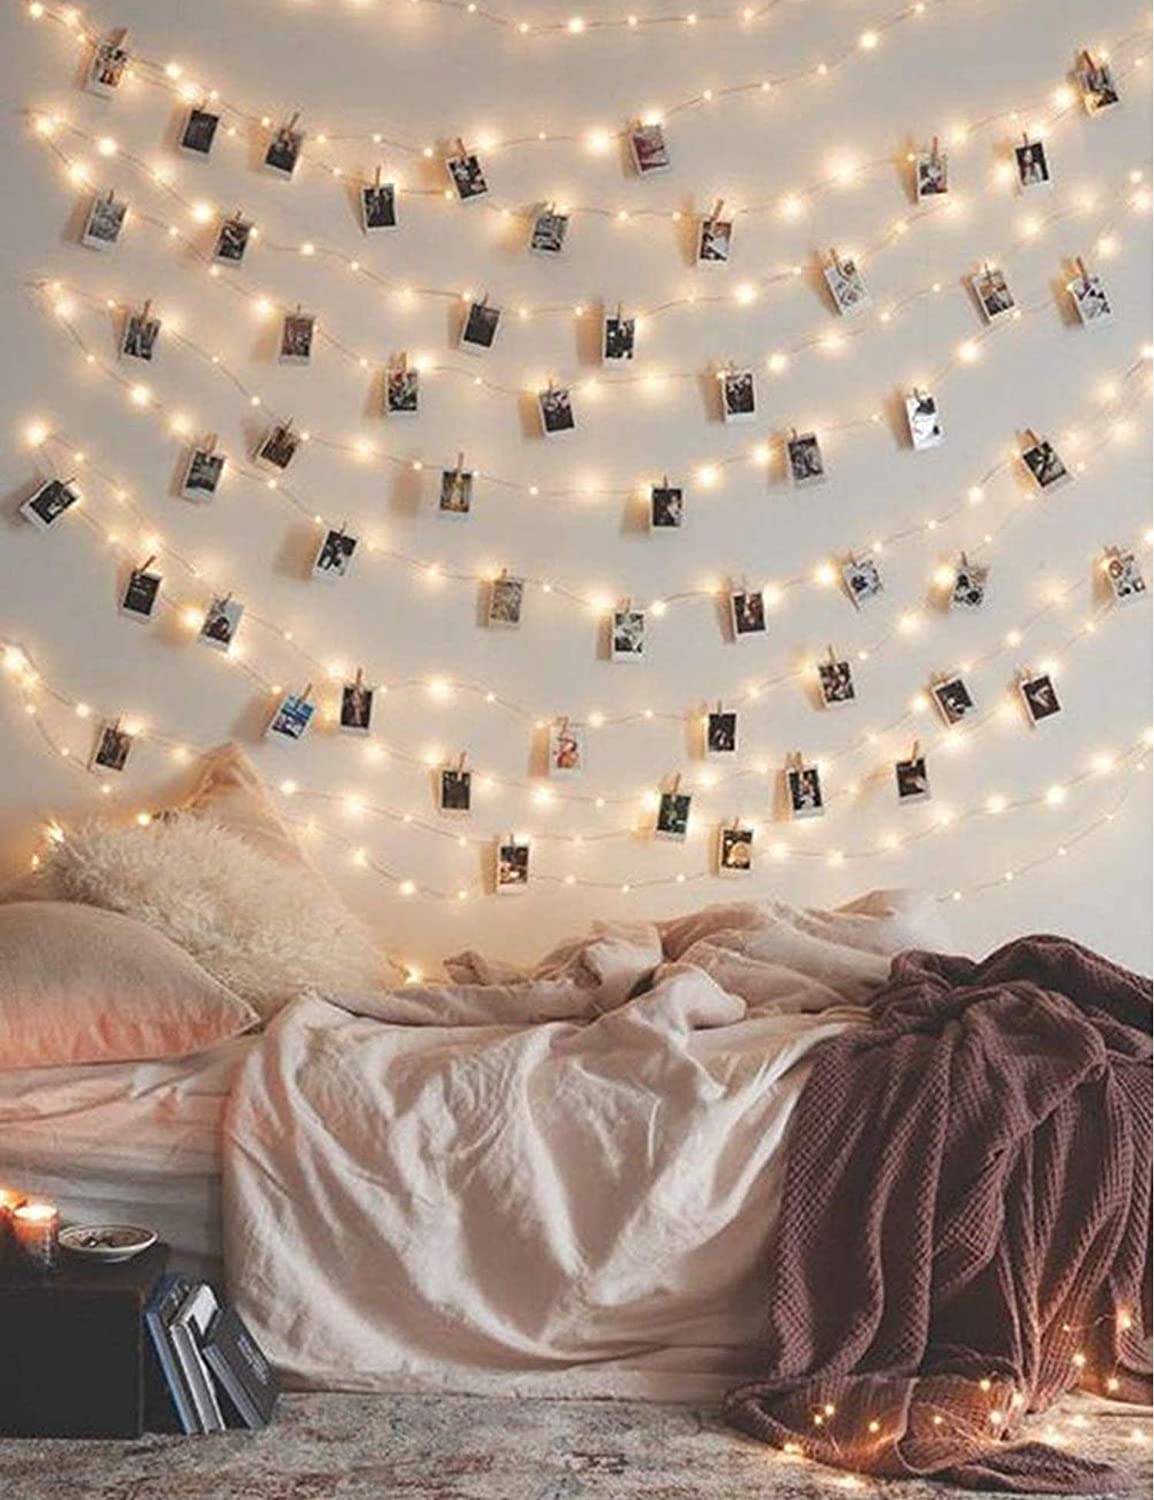 Dorm Room Ideas to decorate with fairy lights and rugs virtual e-design services